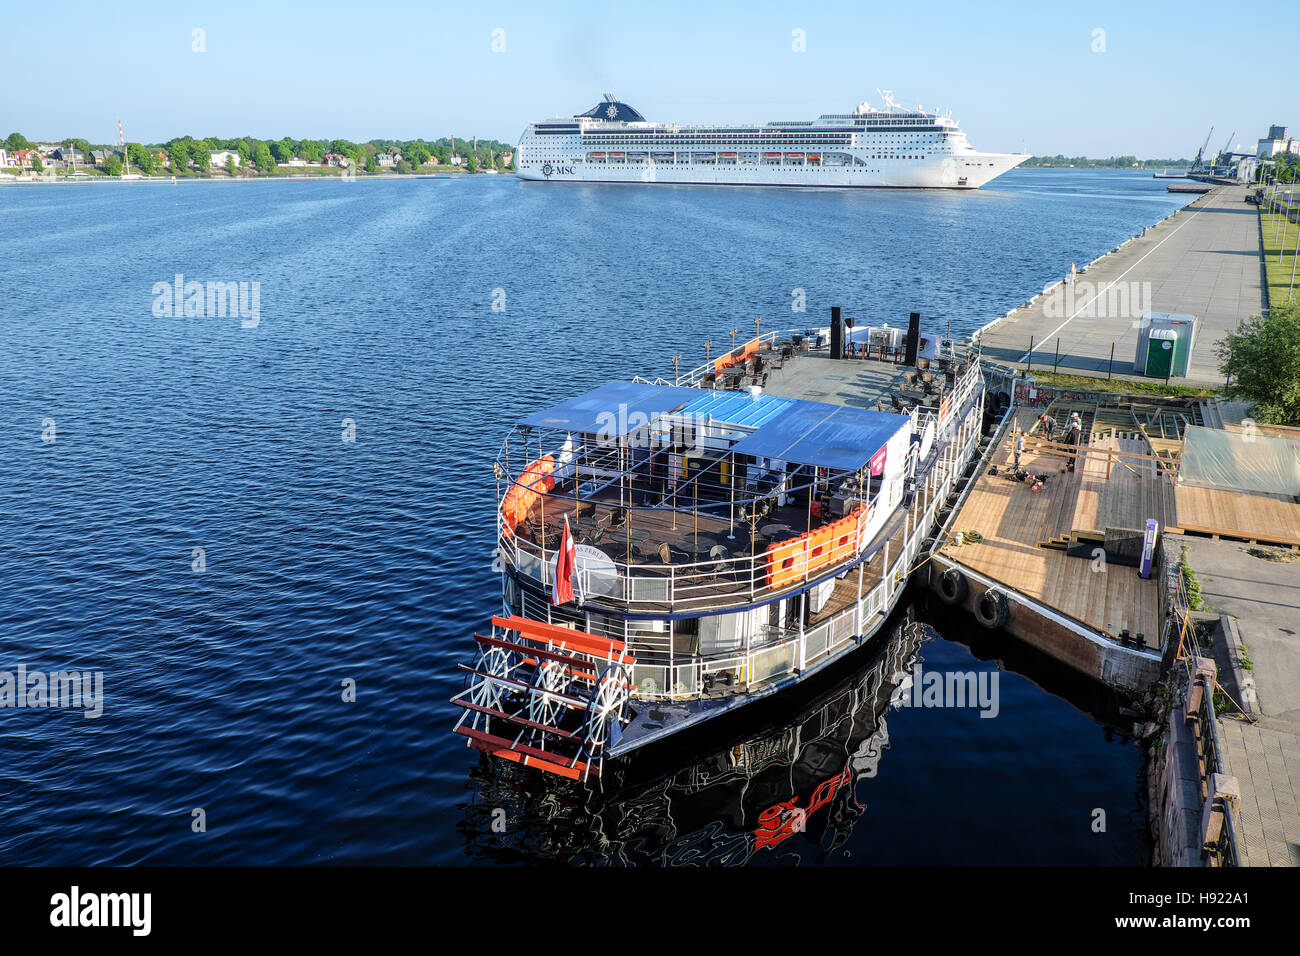 Riga, Latvia - May 21, 2016: Cruise Ship MSC Opera turning round and Touristic river boat with paddle wheel by the city embankment Stock Photo